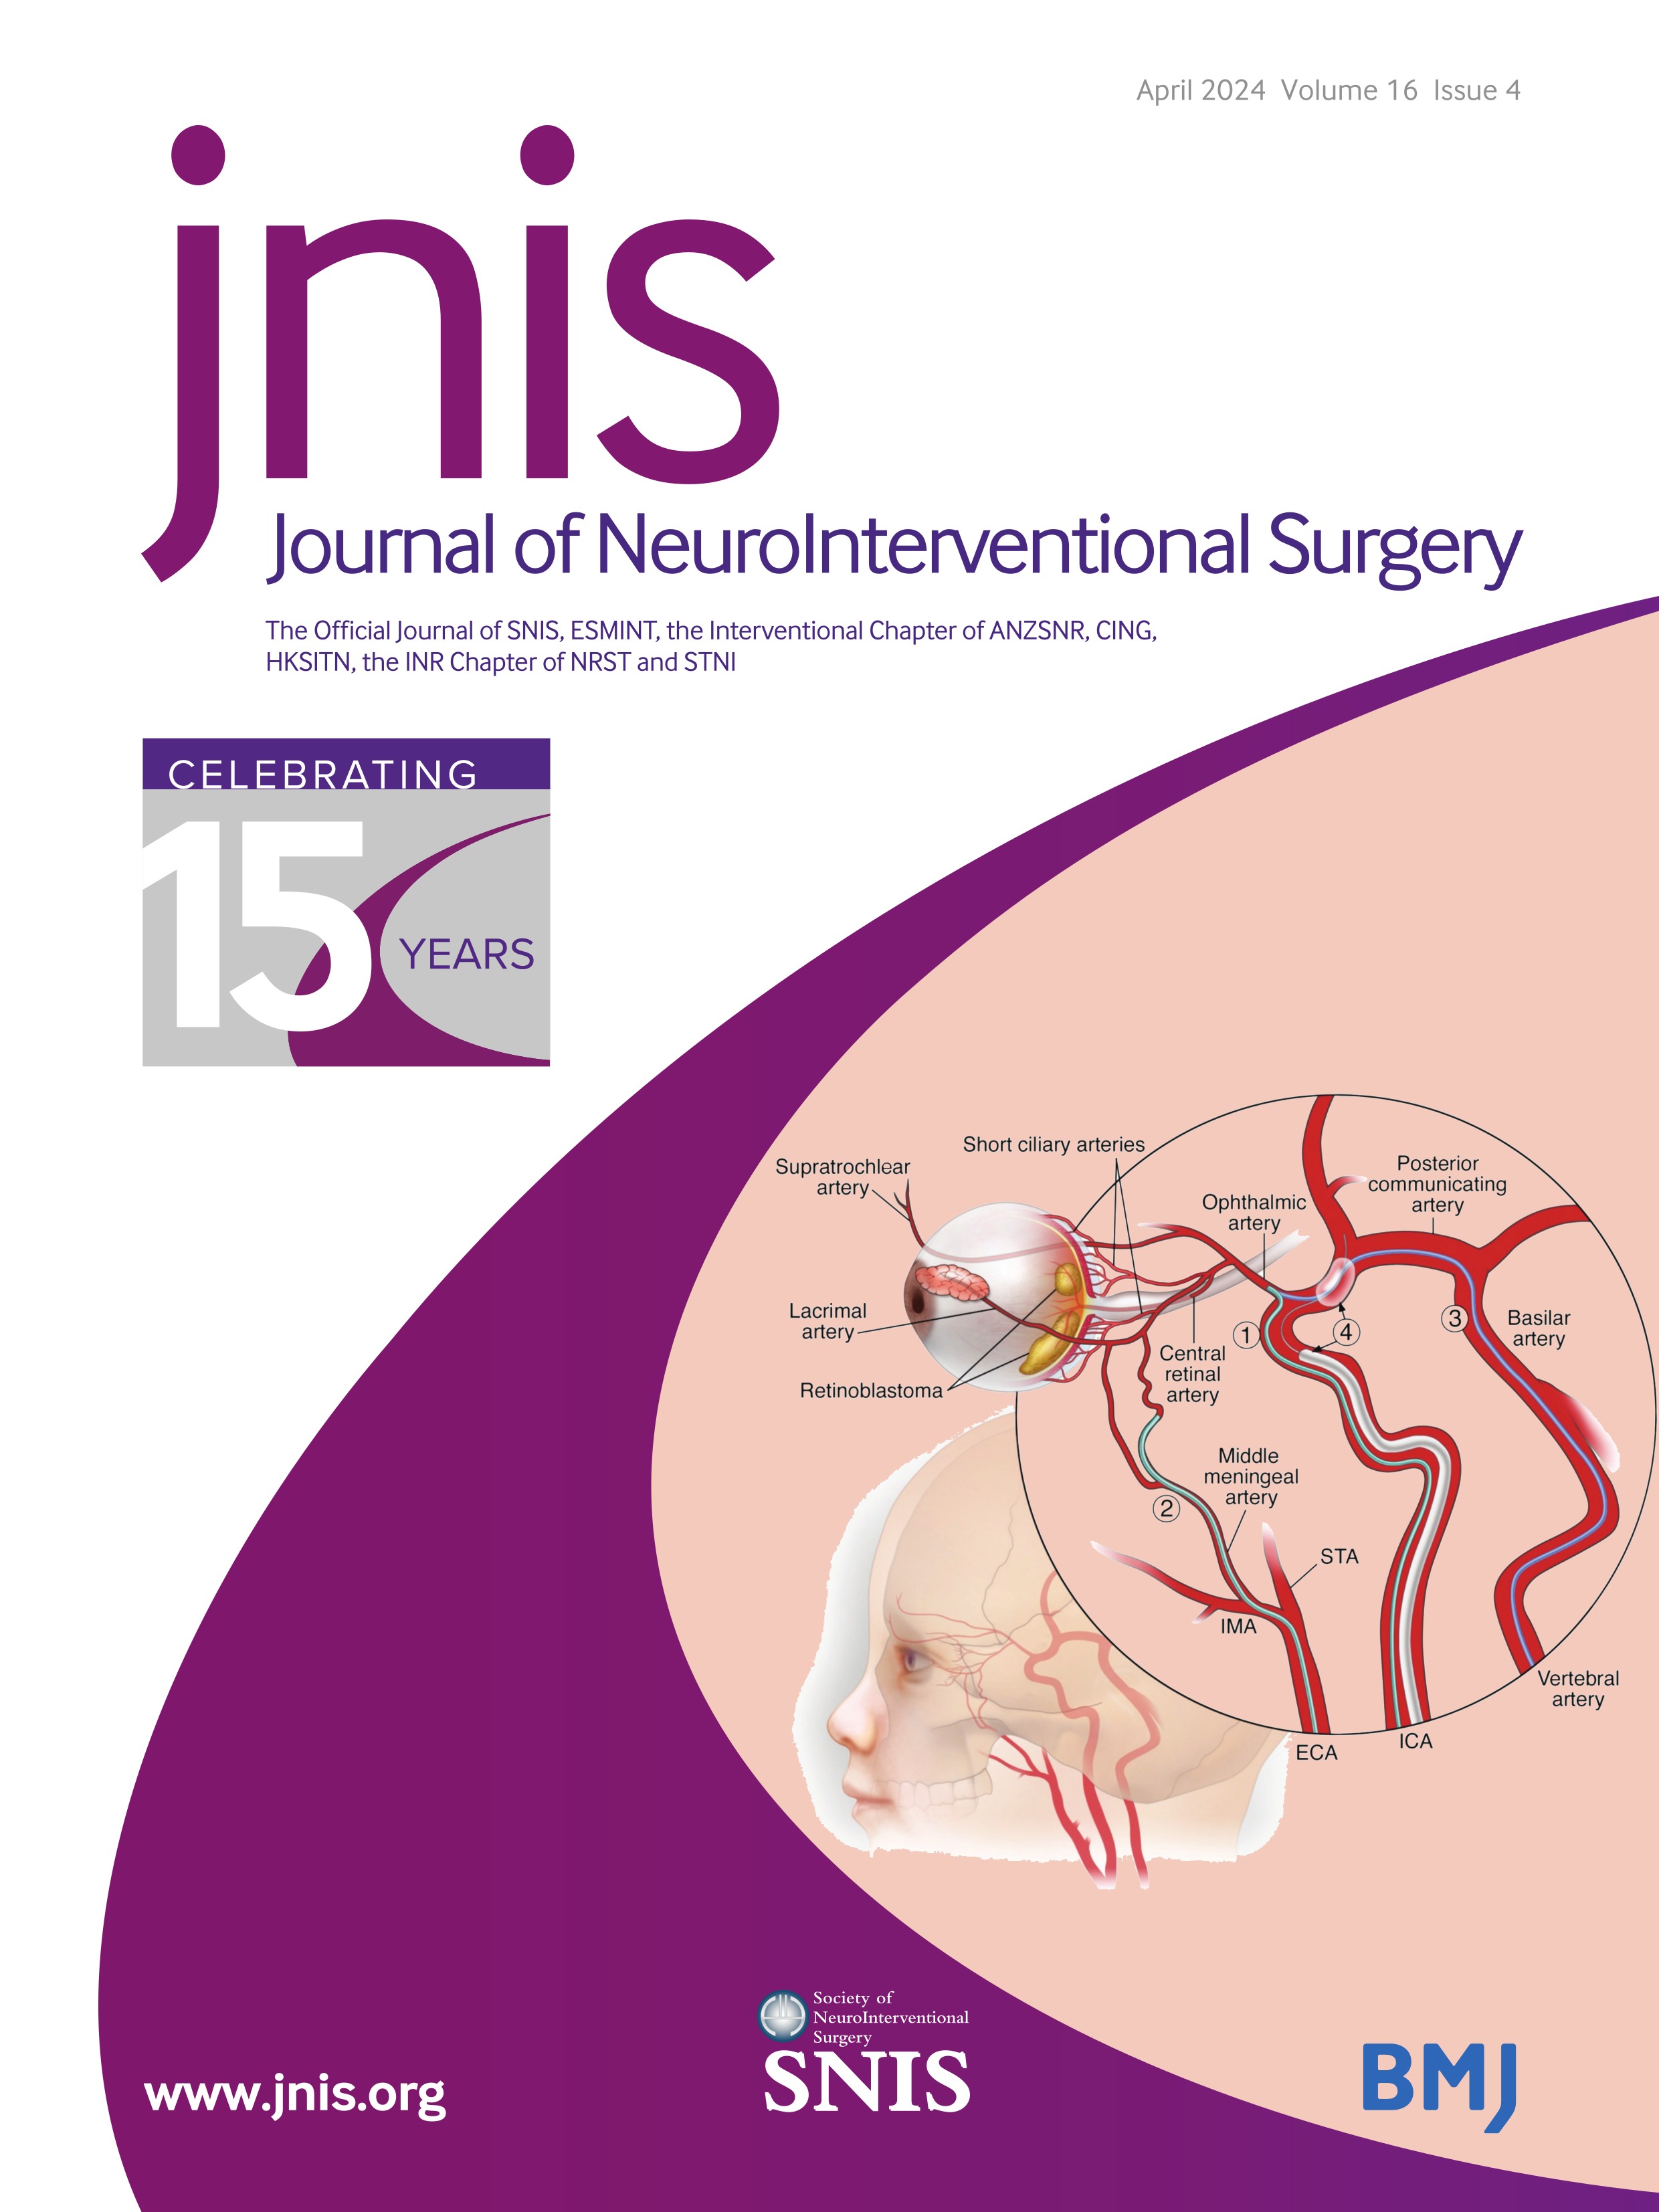 Outcomes in patients with large vessel occlusion strokes undergoing mechanical thrombectomy with concurrent COVID-19: a nationwide retrospective analysis